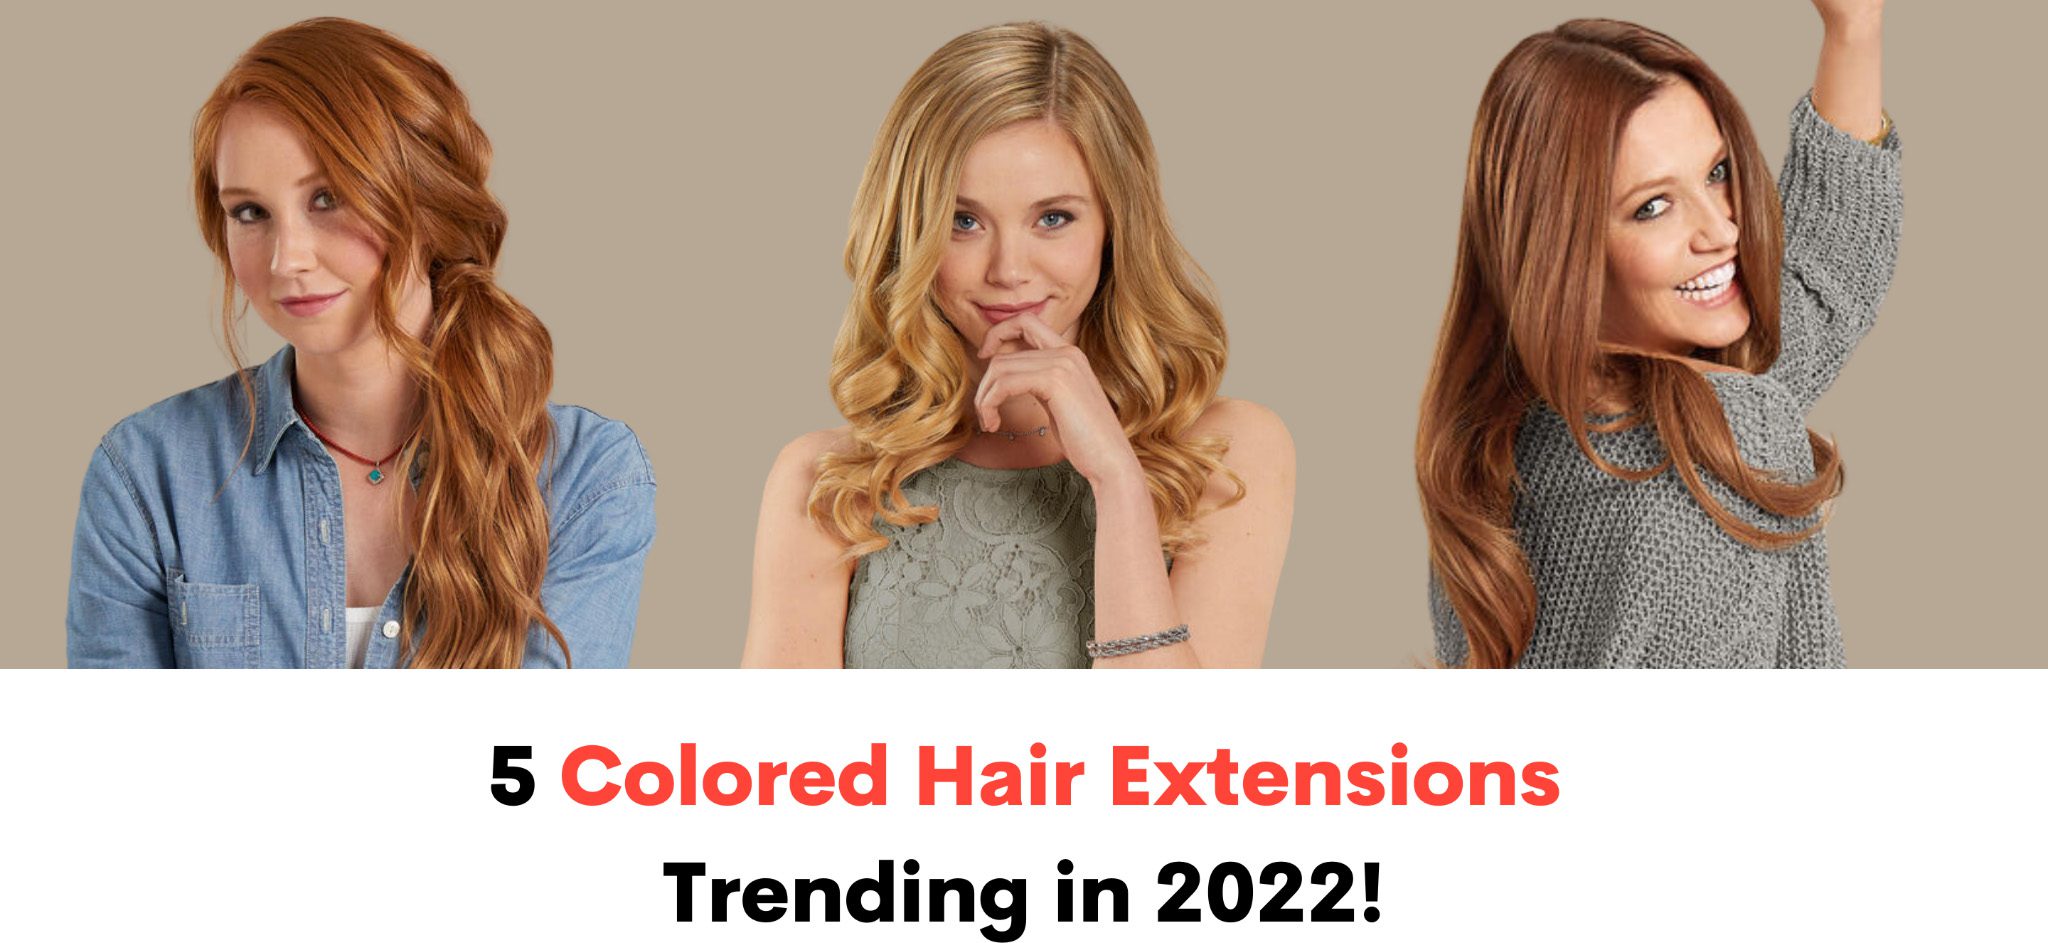 5 Colored Hair Extensions Trending in 2022